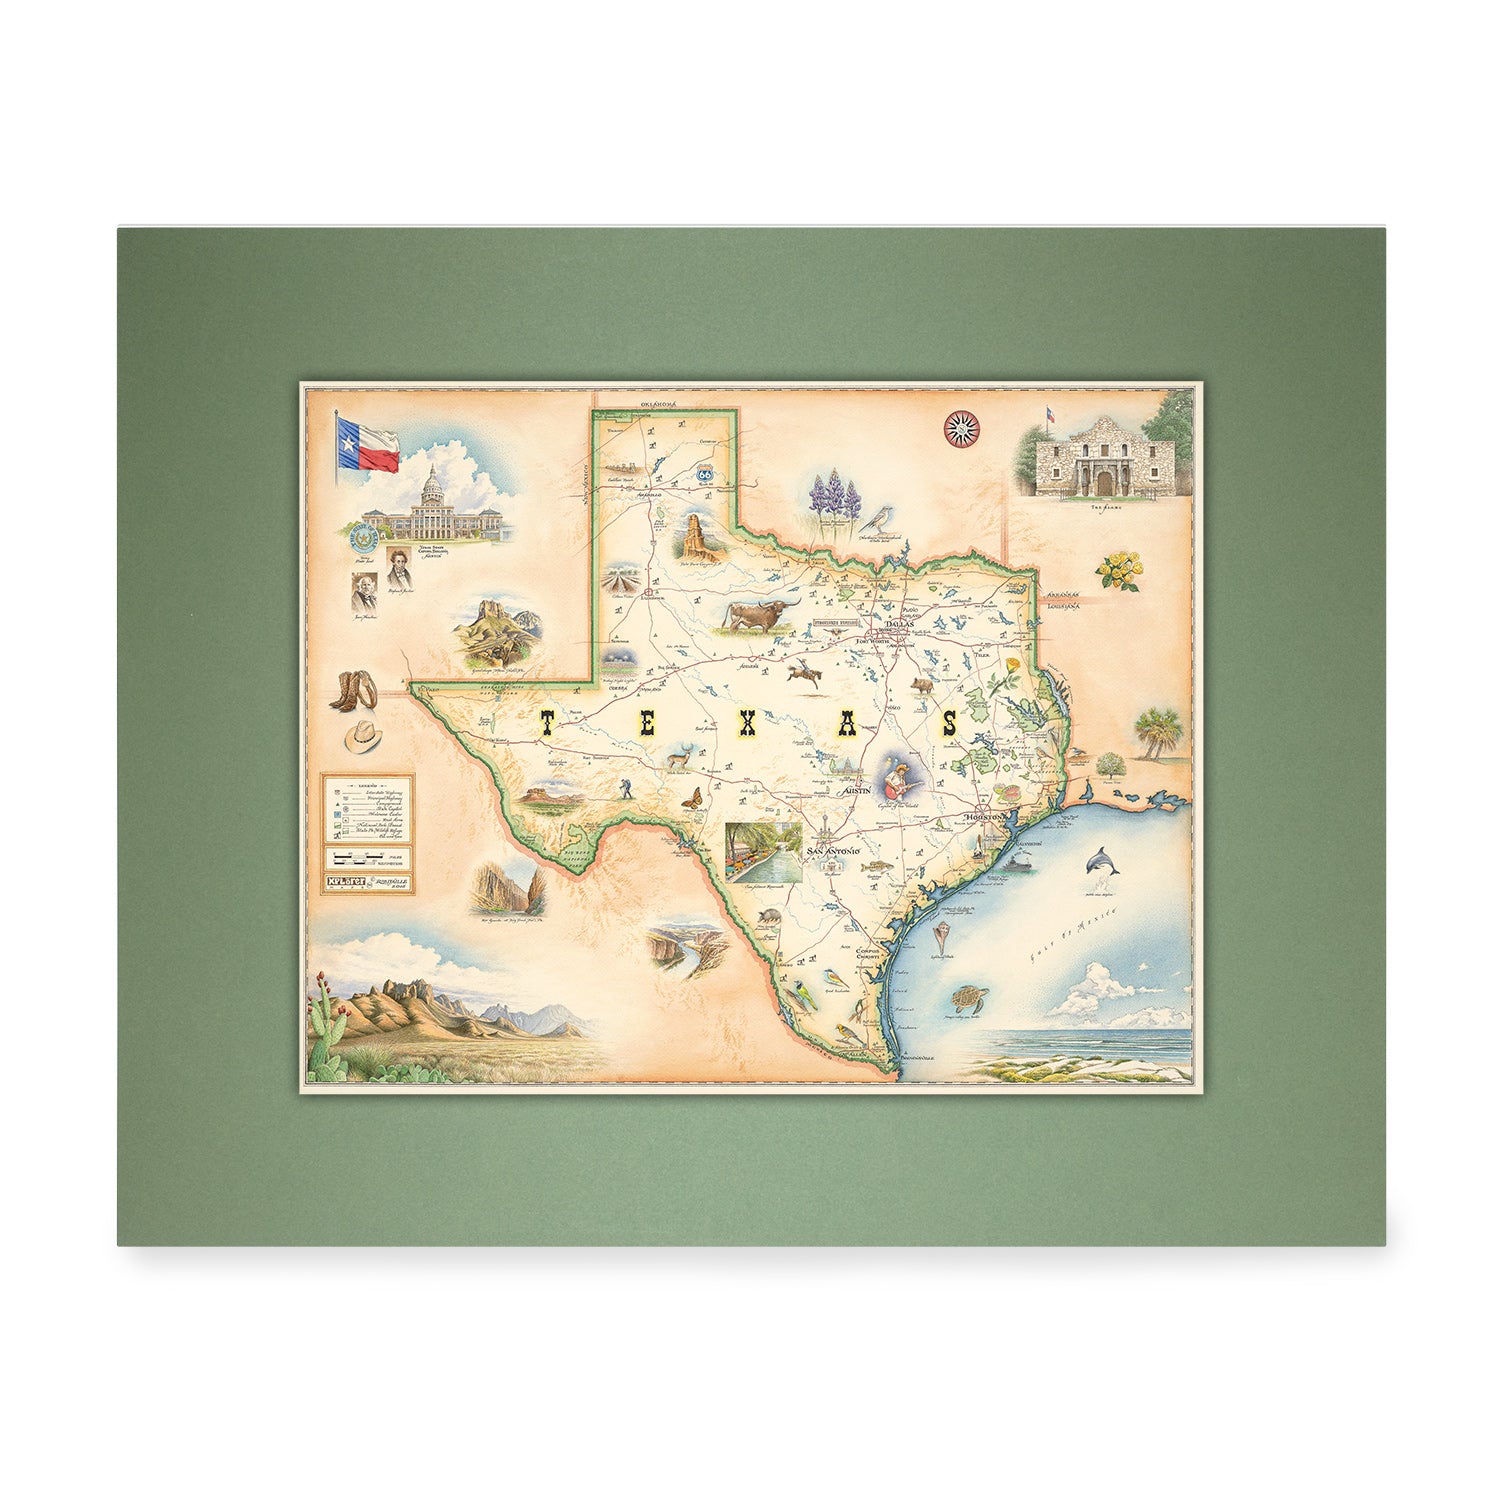 Texas State Mini-Map by Xplorer Maps in earth tones of brown and beige. The map features illustrations of places such as the Alamo, San Antonio Riverwalk, and Guadalupe National Park. Flora and fauna include a Venus flytrap, longhorns, a Monarch butterfly, and an armadillo. 